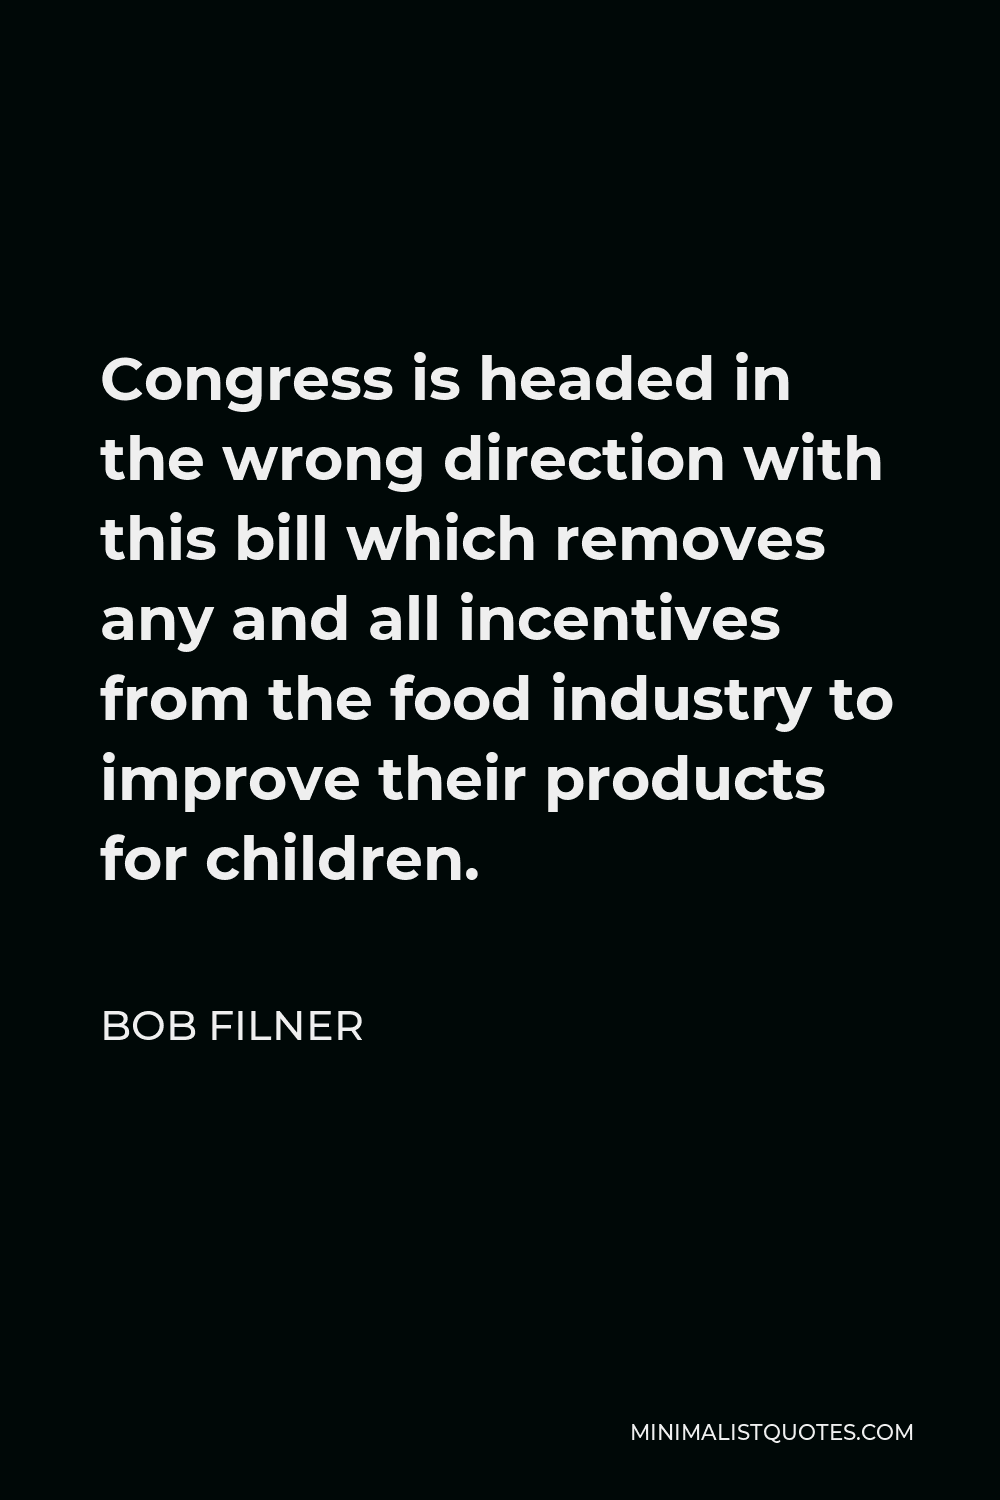 Bob Filner Quote - Congress is headed in the wrong direction with this bill which removes any and all incentives from the food industry to improve their products for children.